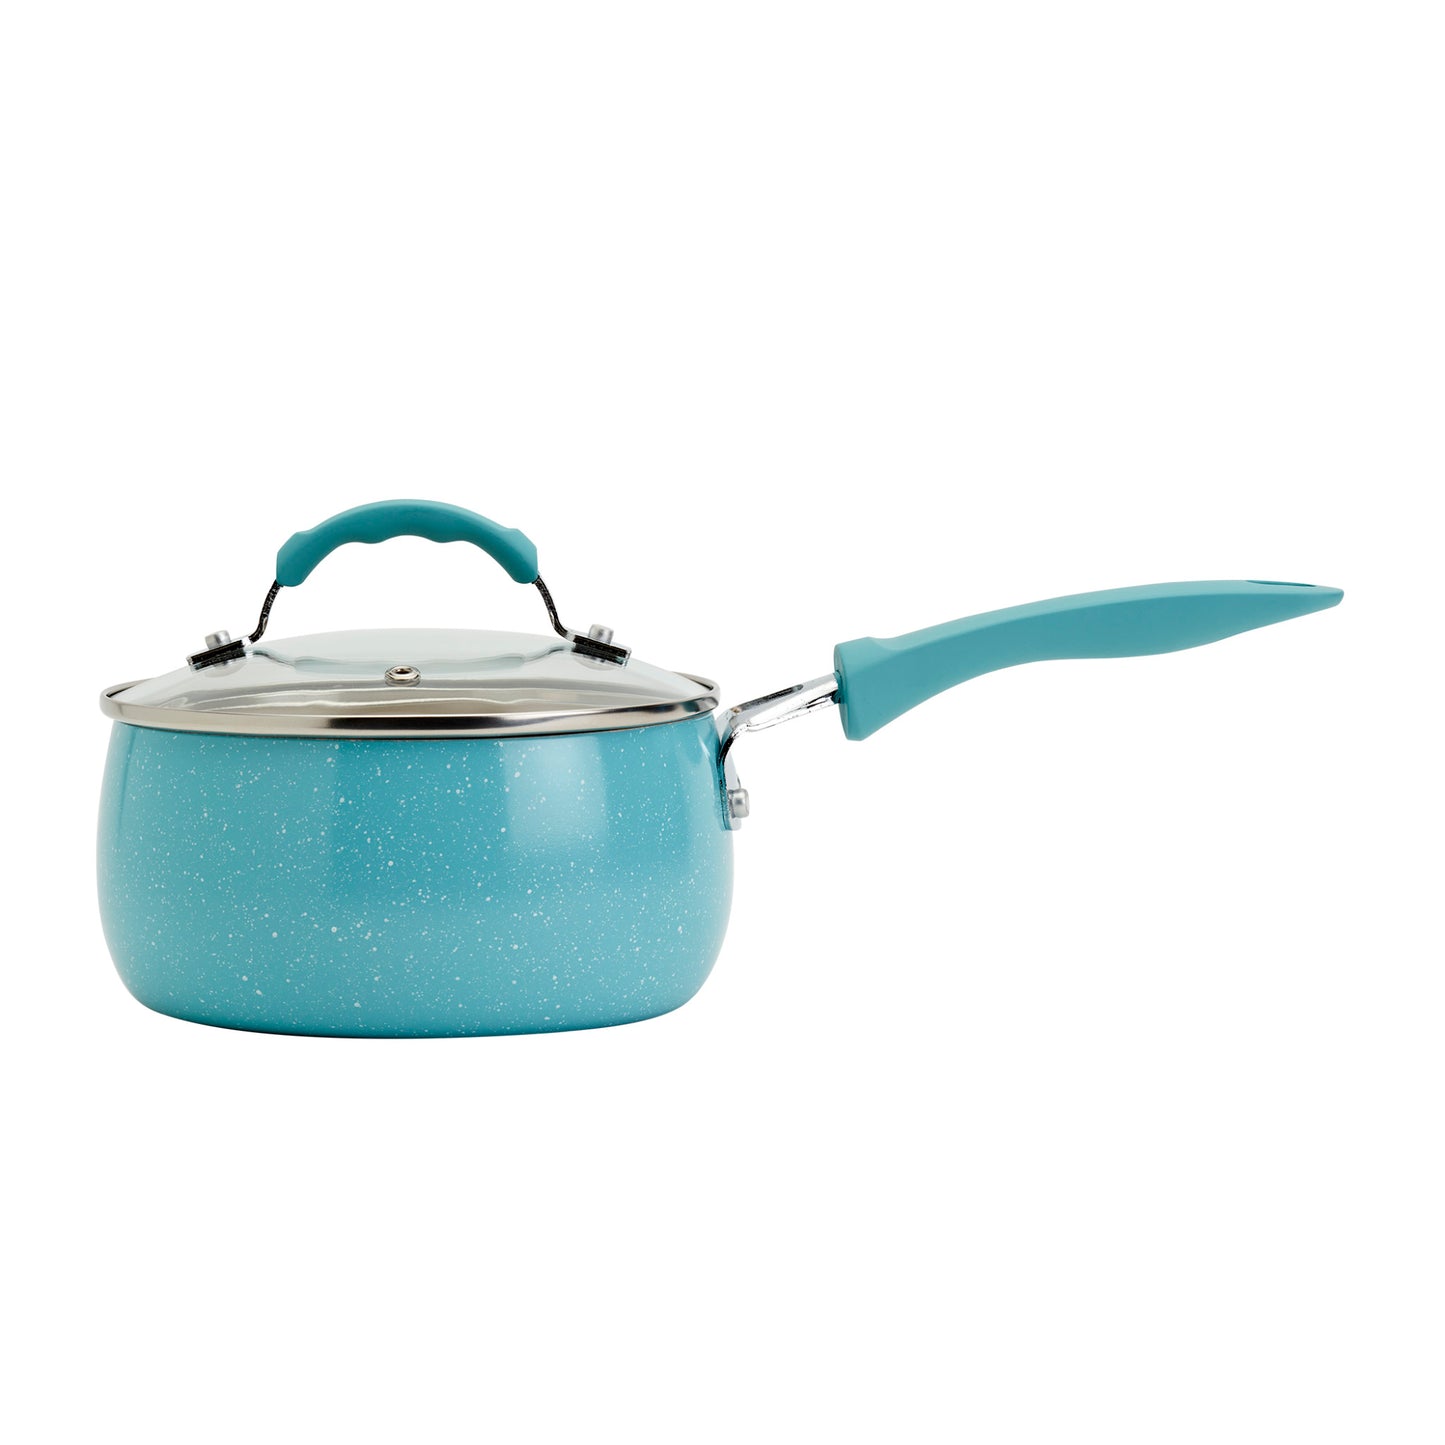 Dolly 2.5Qt Covered Sauce Pan - Speckled Aqua